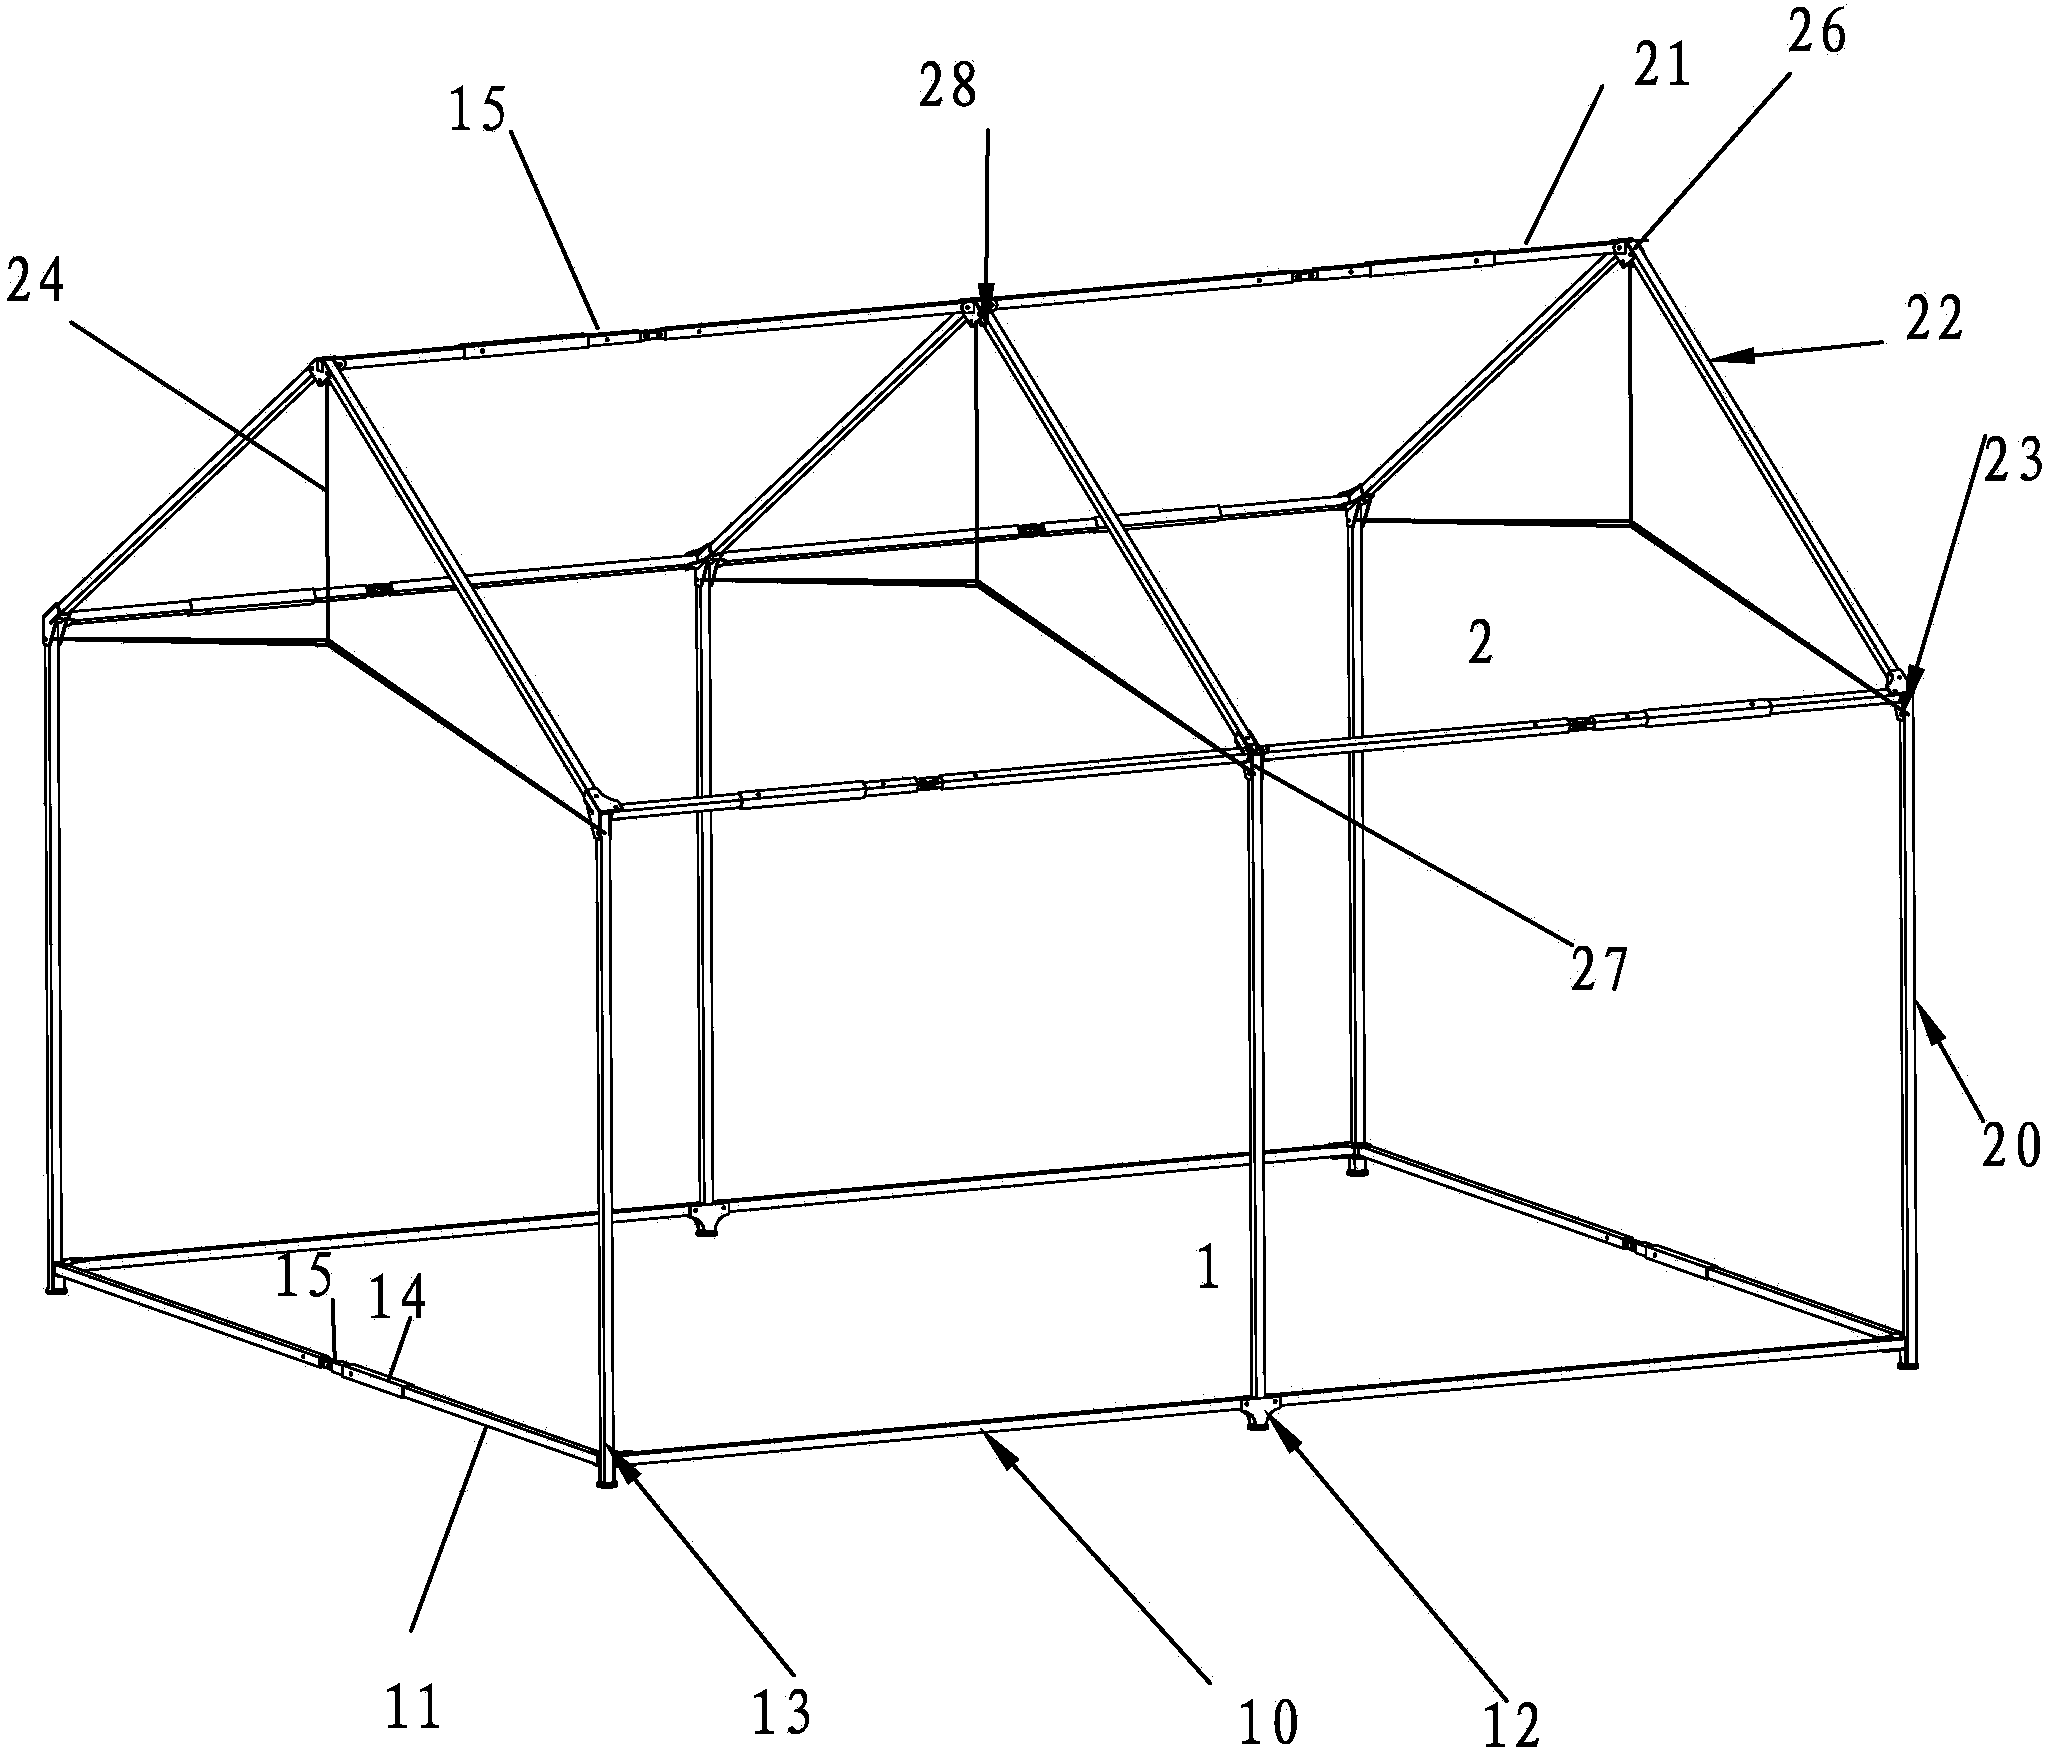 Environment-friendly disaster relief tent and method for unfolding and folding tent frame